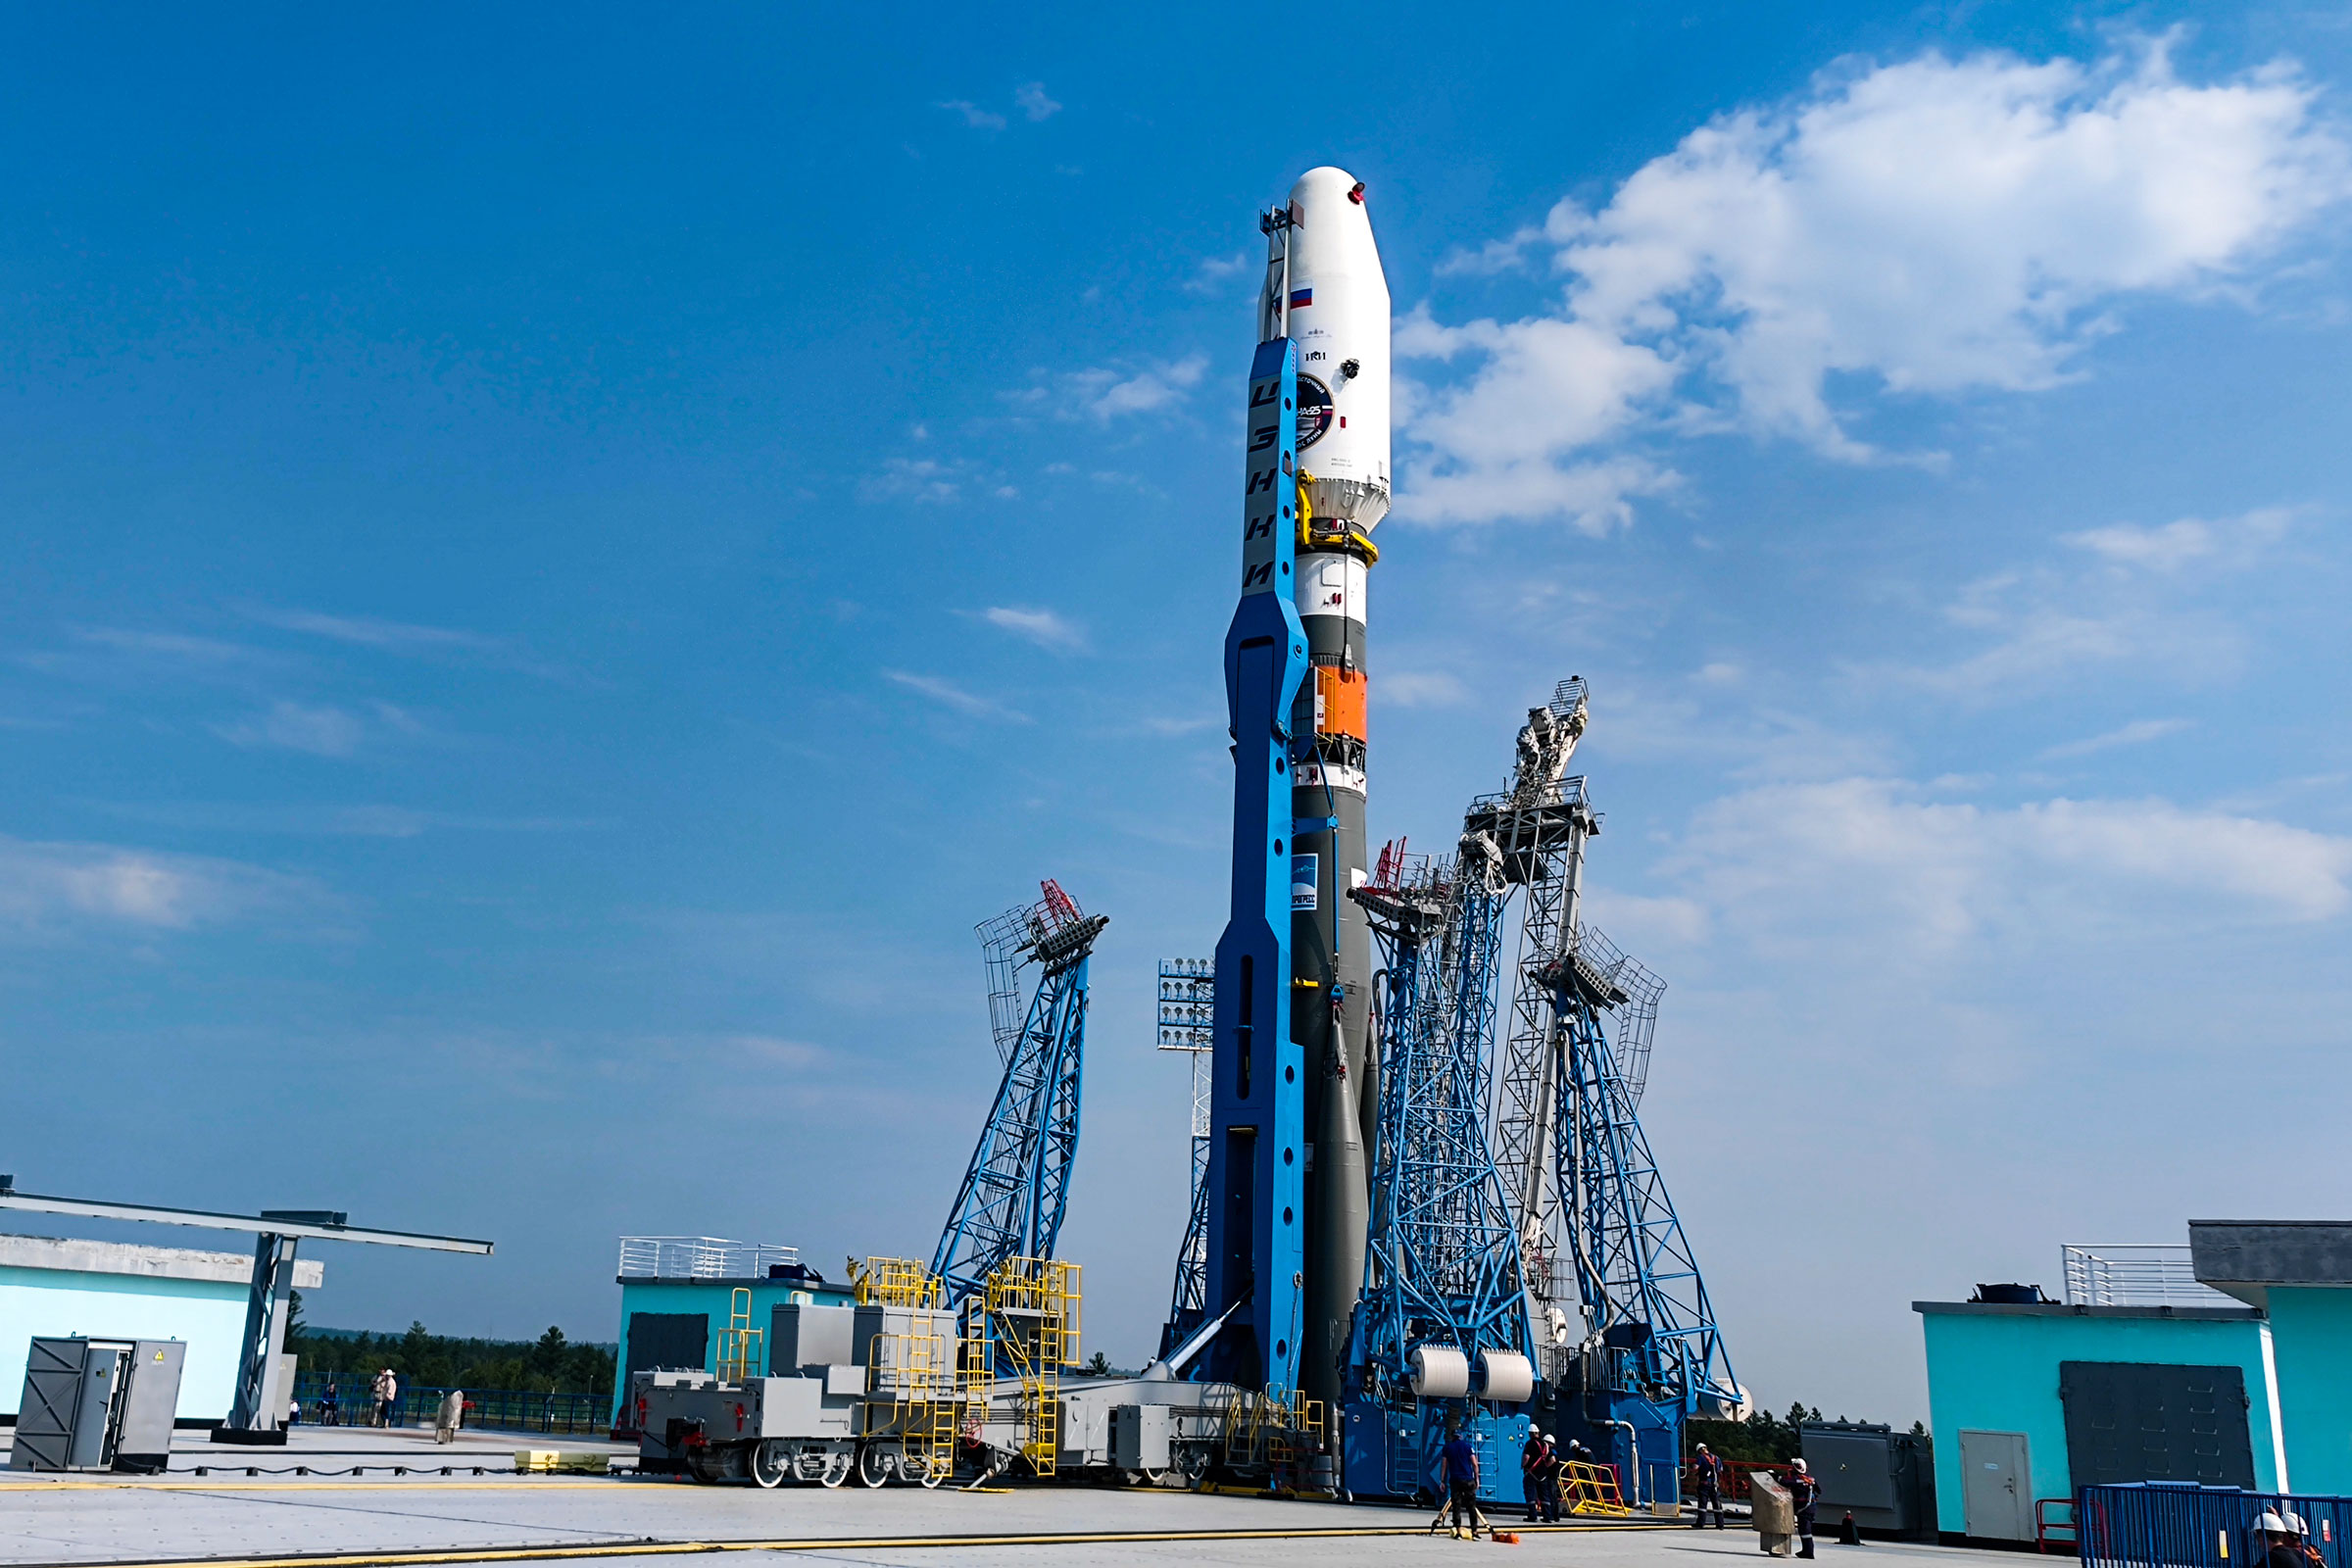 the moon lander Luna 25 automatic station is set at a launch pad at the Vostochny Cosmodrome in the Russian Far East